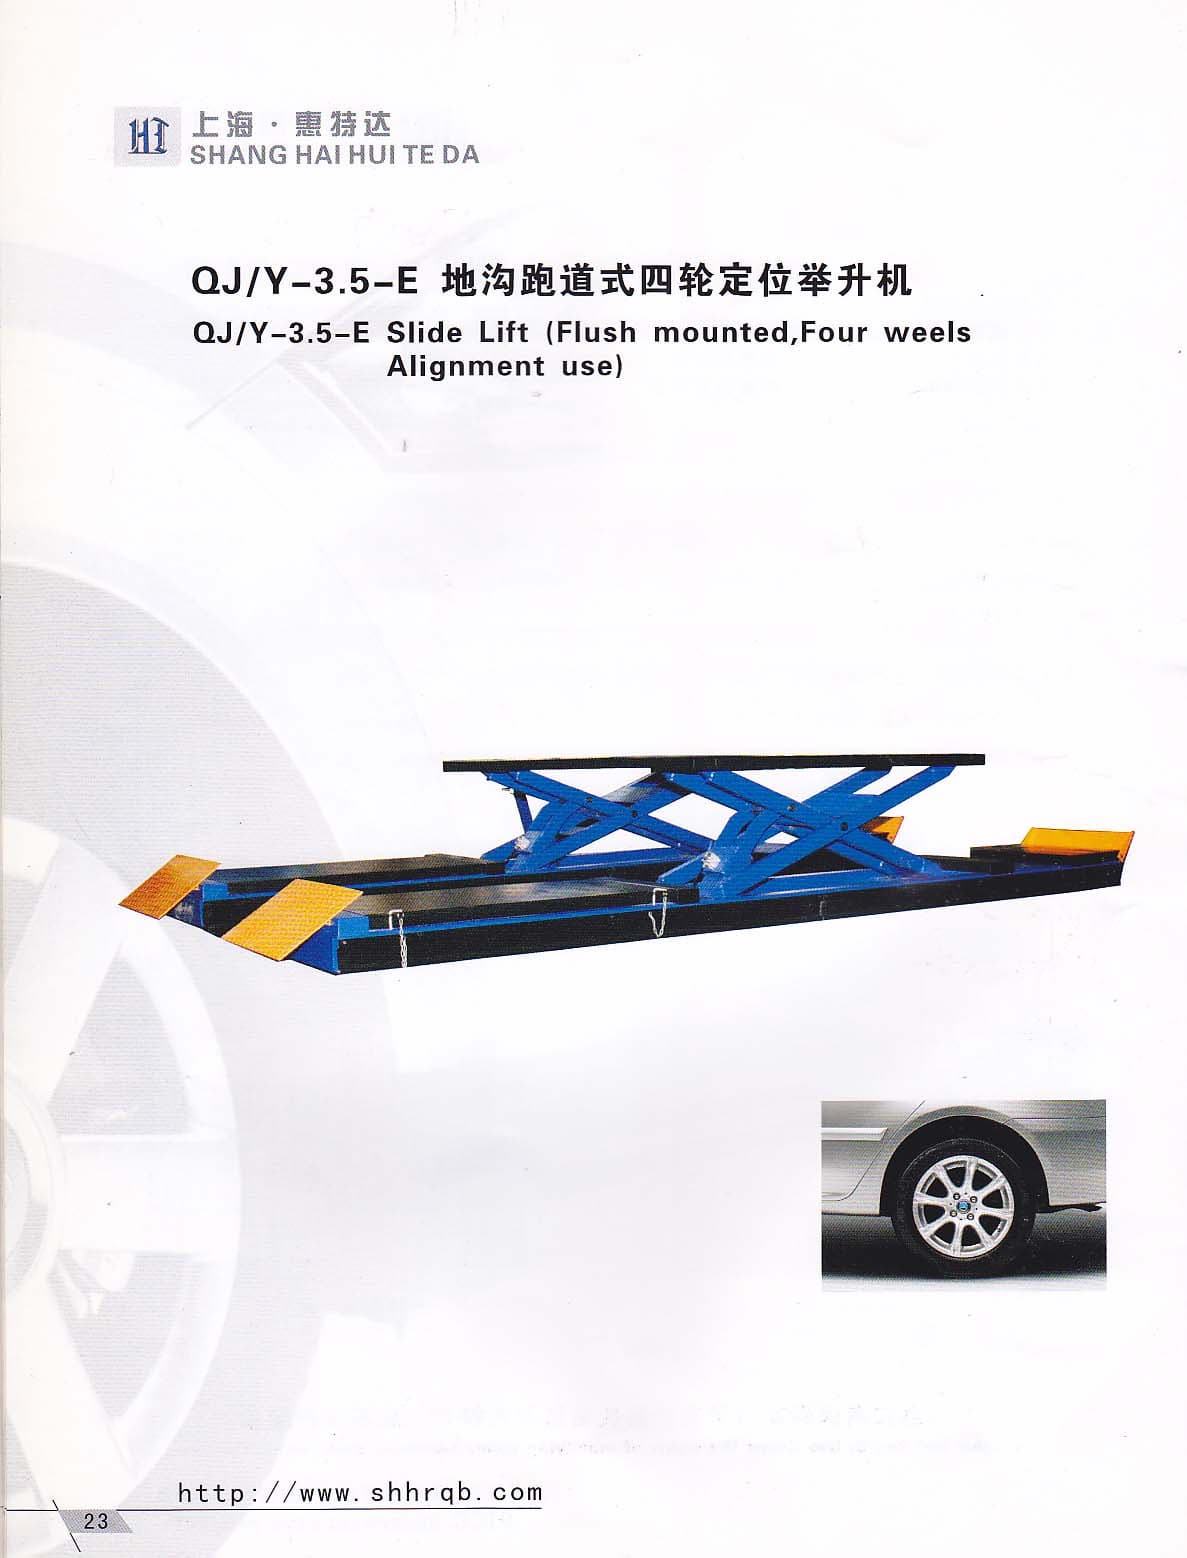 QJ/Y-3.5-E Slide Lift(Flush mounted, Four weels Alignment use)